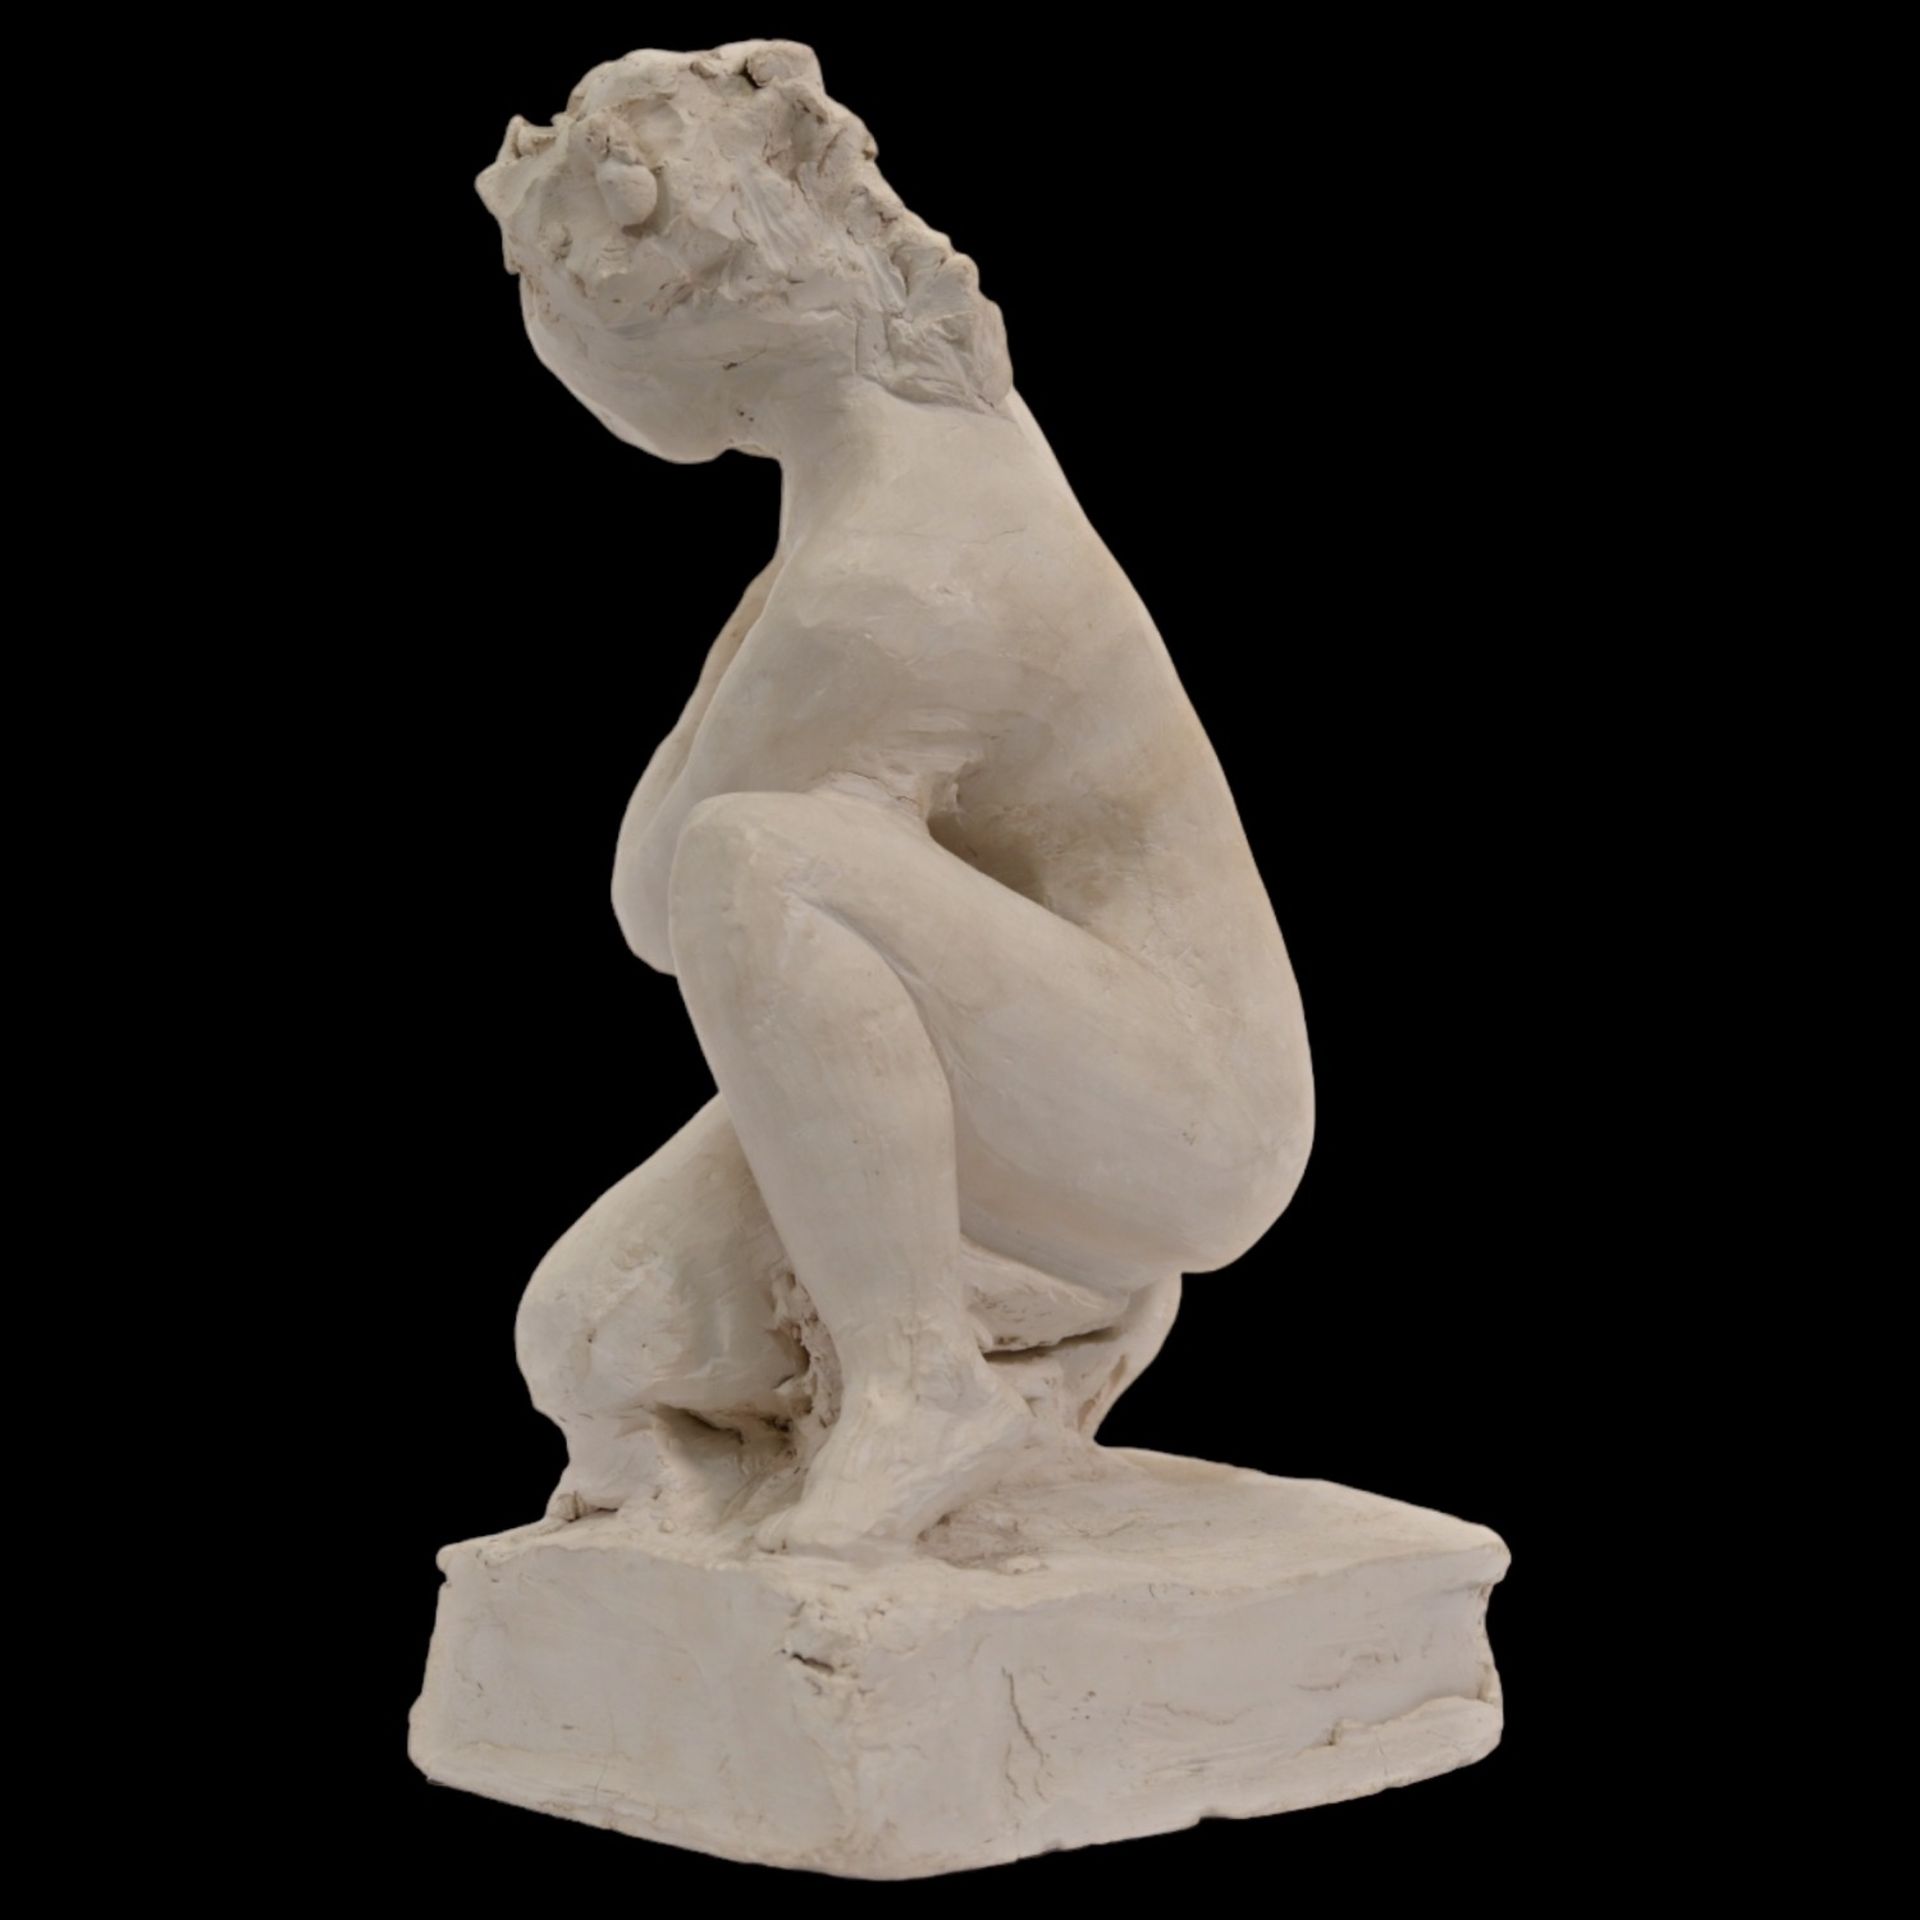 Terracotta sculpture "Young Woman", unsigned, France, 19th century. Collectibles and home decor. - Image 3 of 8